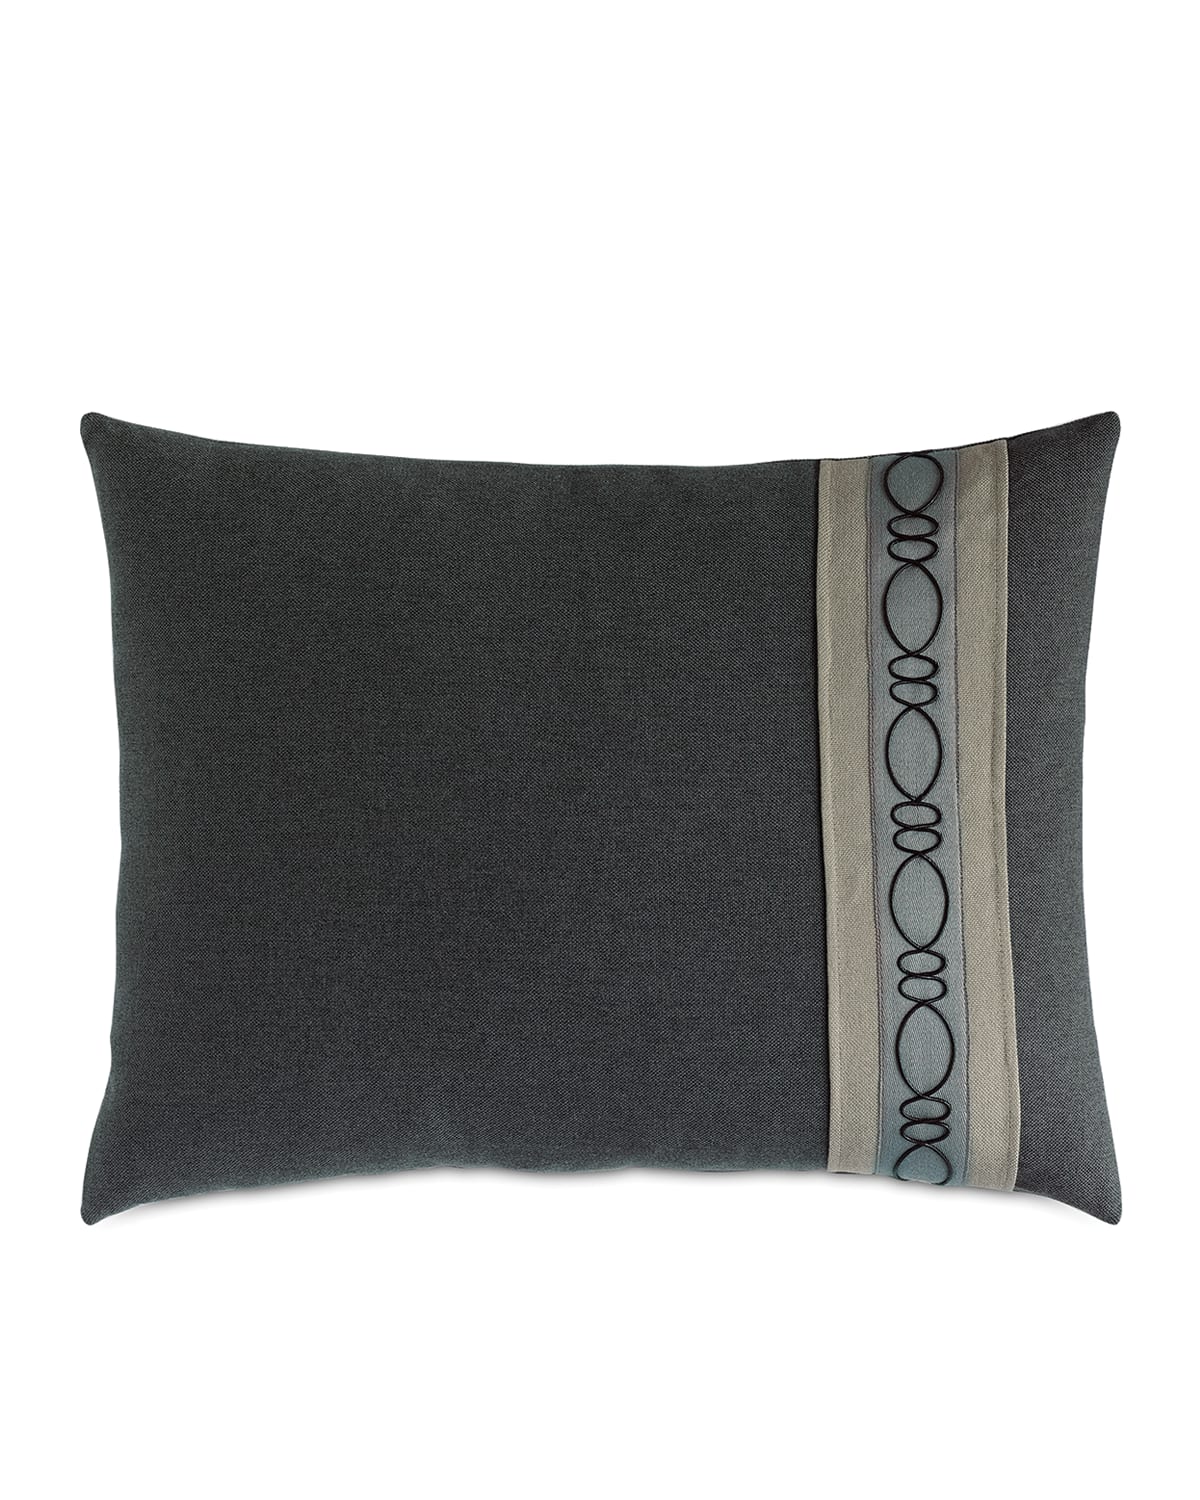 Shop Eastern Accents Kilbourn Standard Right Sham In Charcoal